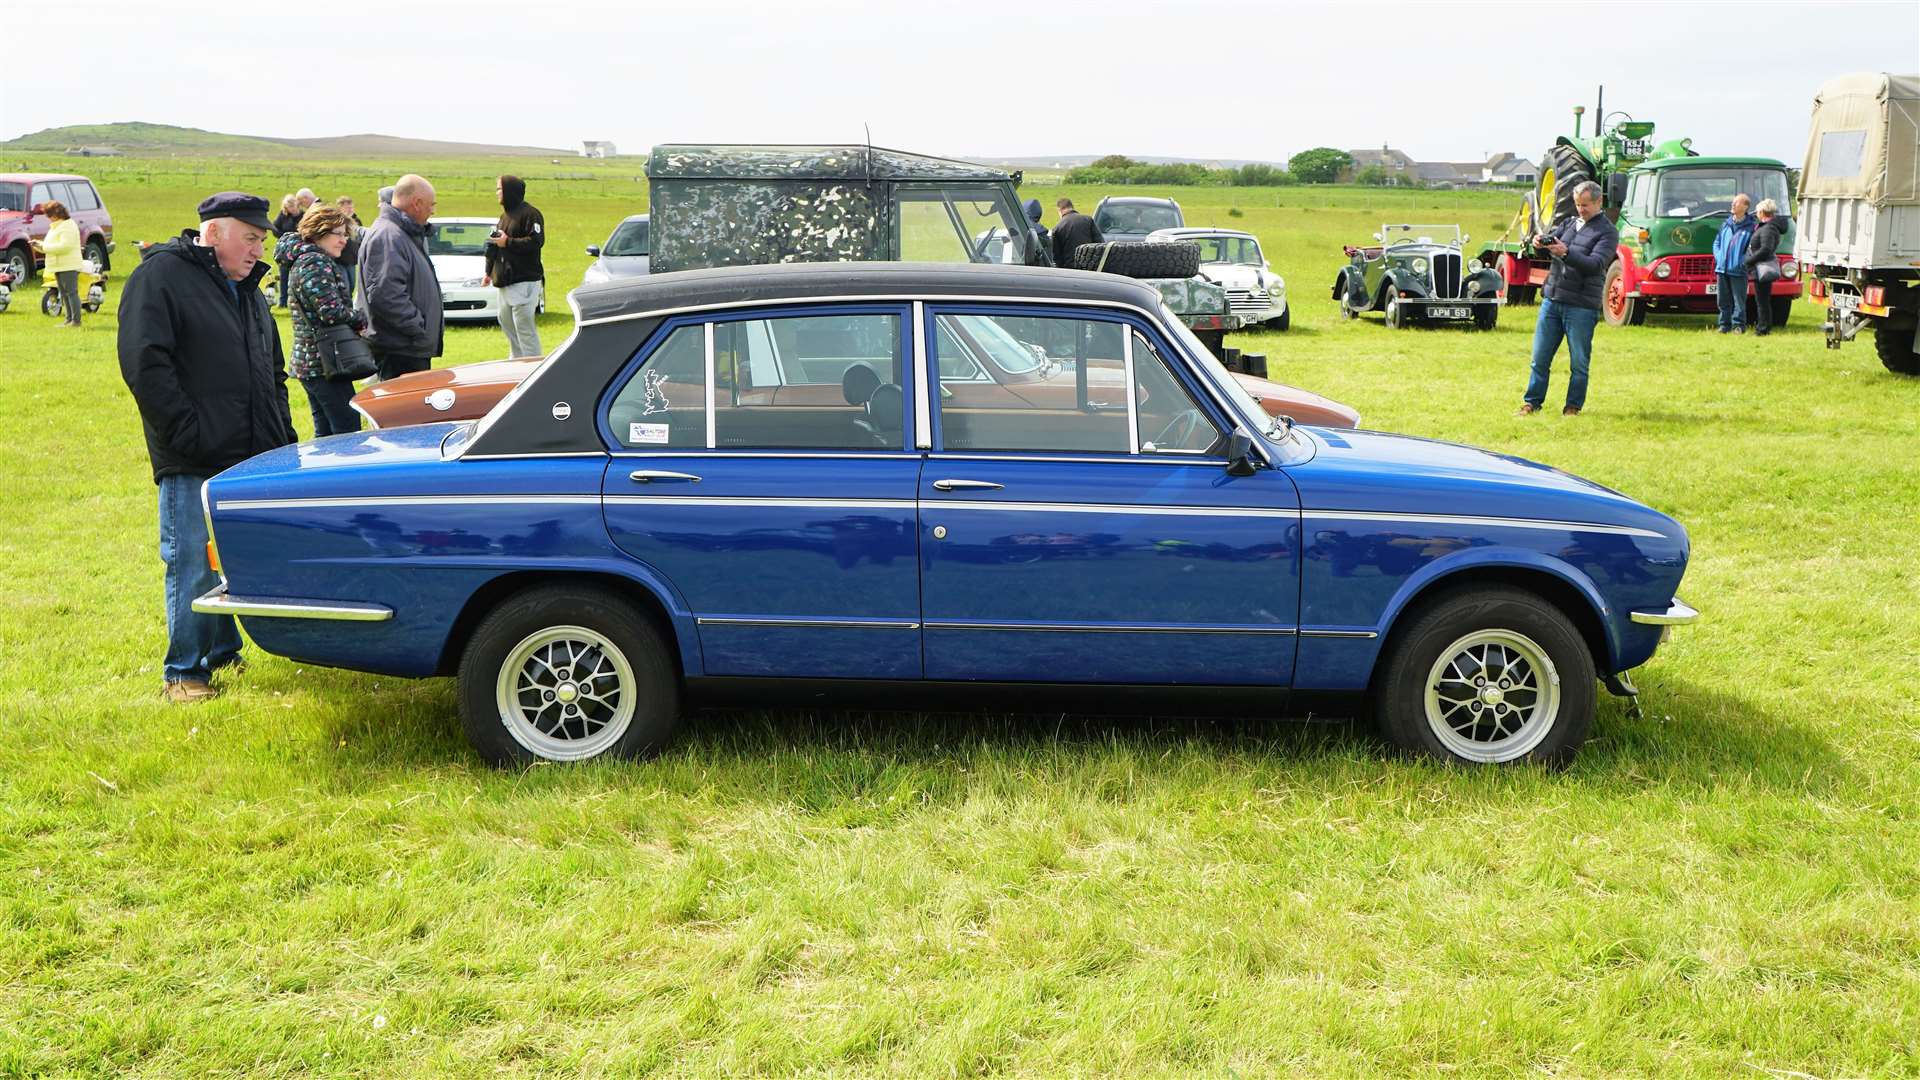 Many classics had been well polished up for the popular event. This 1975 Triumph Dolomite Sprint is owned by Stephen Jappy from Dornoch. Picture: DGS